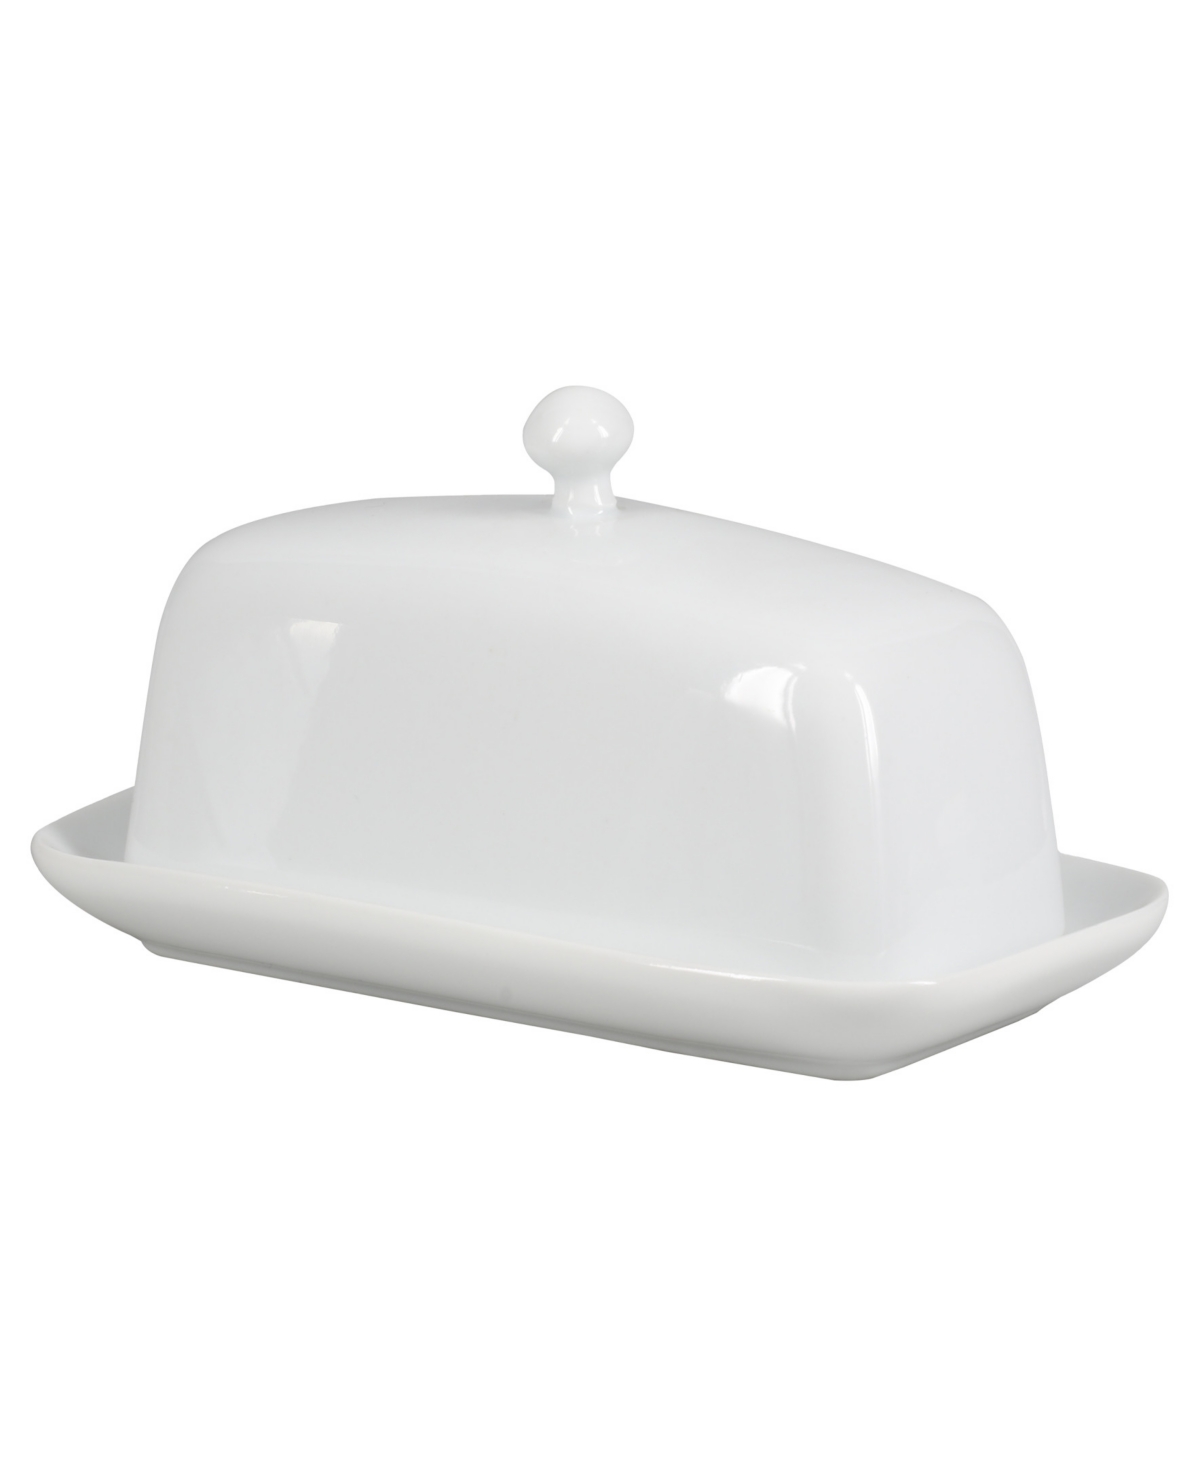 13099862 Covered Butter Dish with Knob Lid sku 13099862